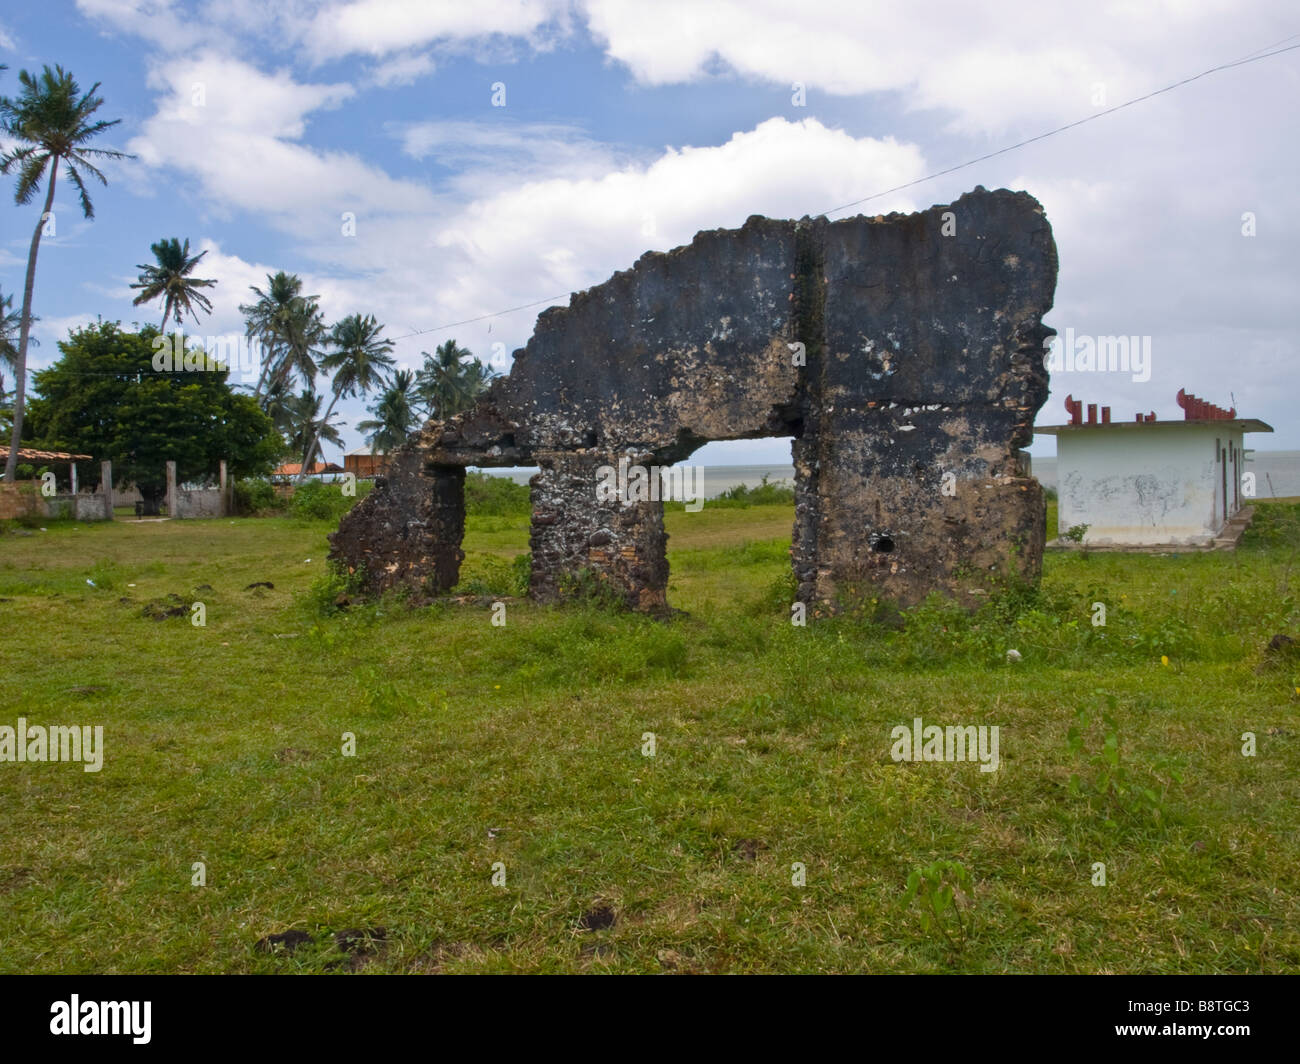 The remnants of 17th century jesuit church in Joanes, Marajo island in the Amazon  Para state, Brazil. Stock Photo